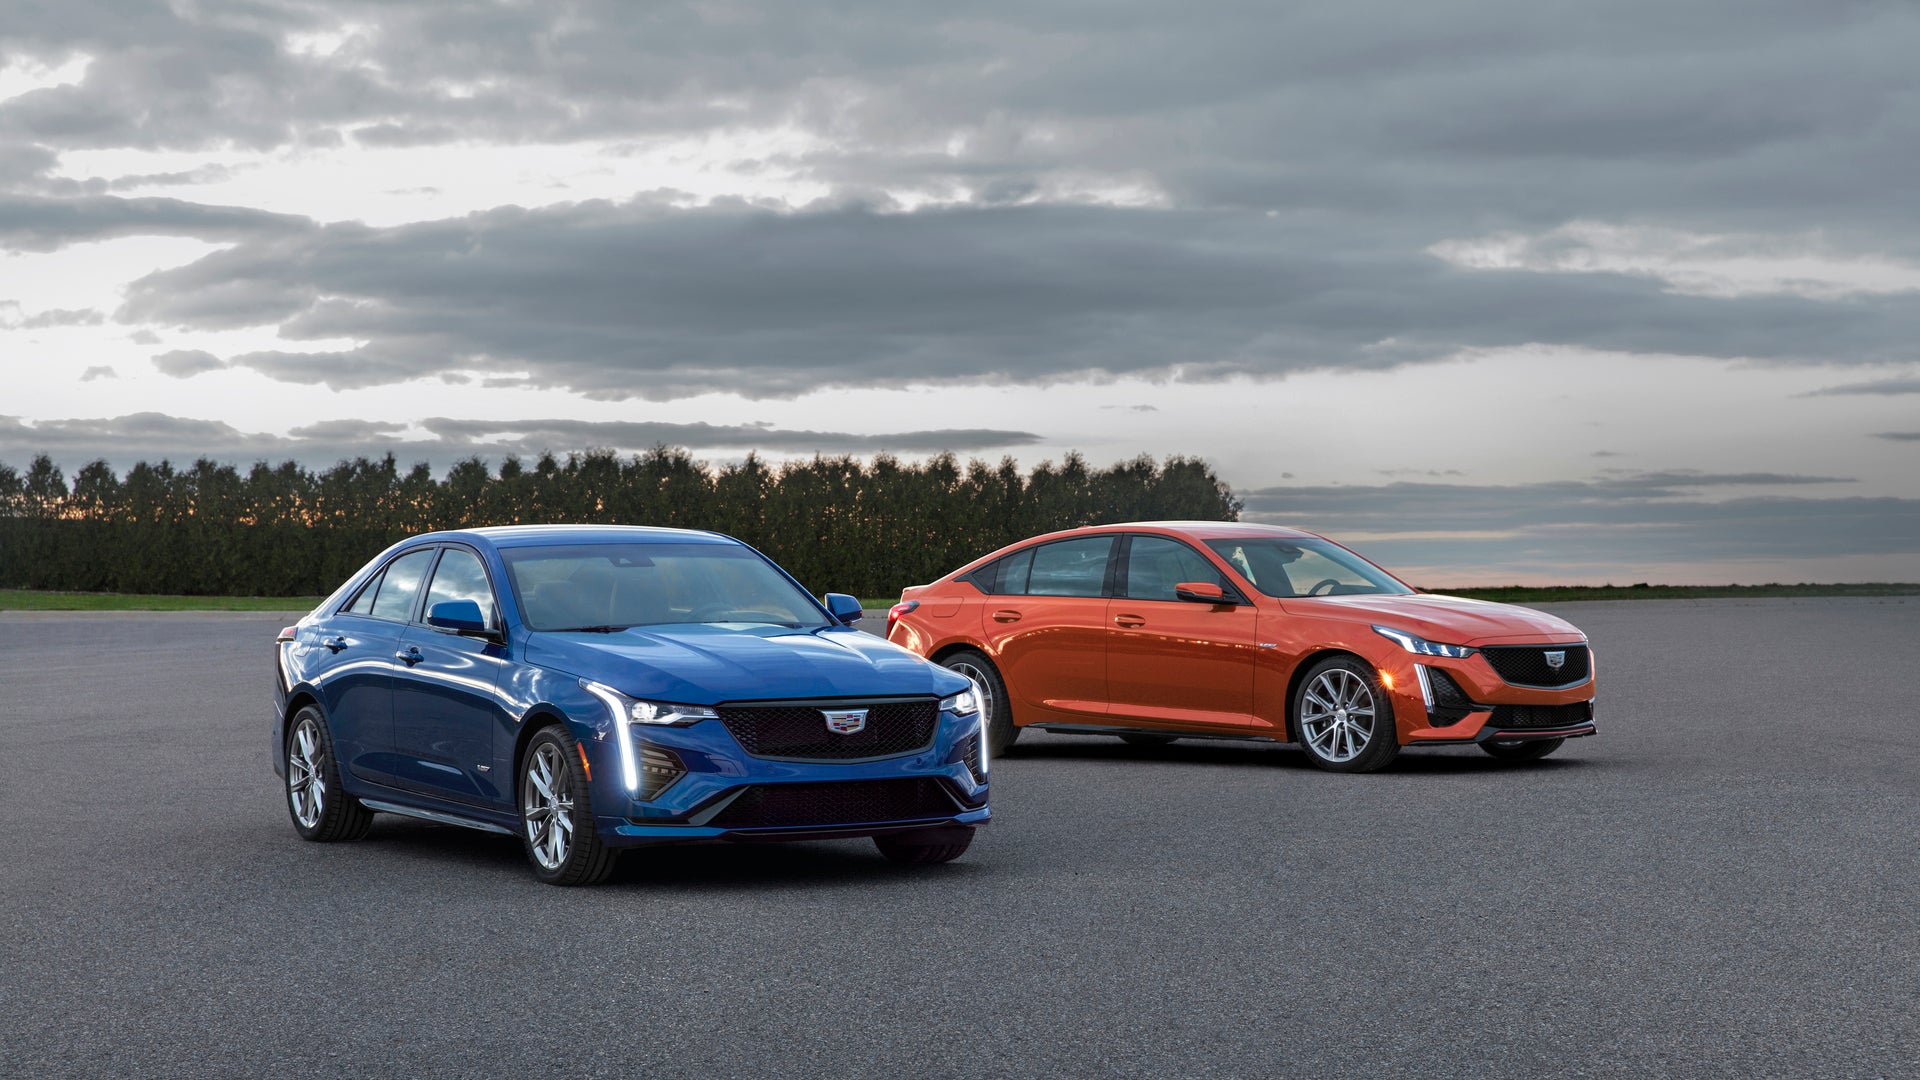 5 Spicy Details About Cadillac’s All-New CT4-V and CT5-V Performance Sedans